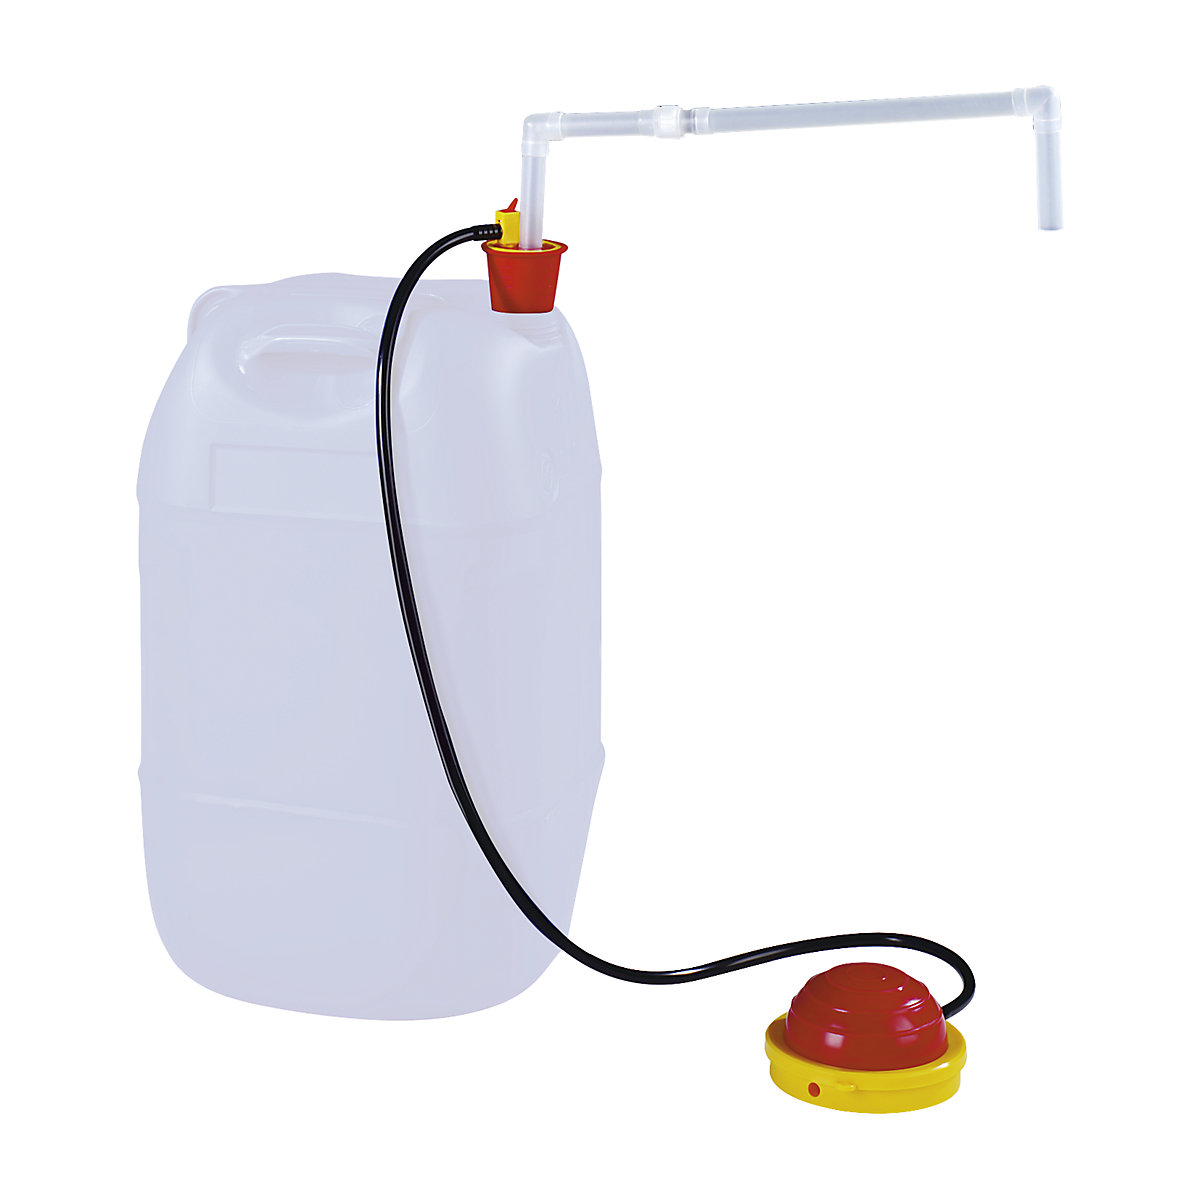 Small container pump